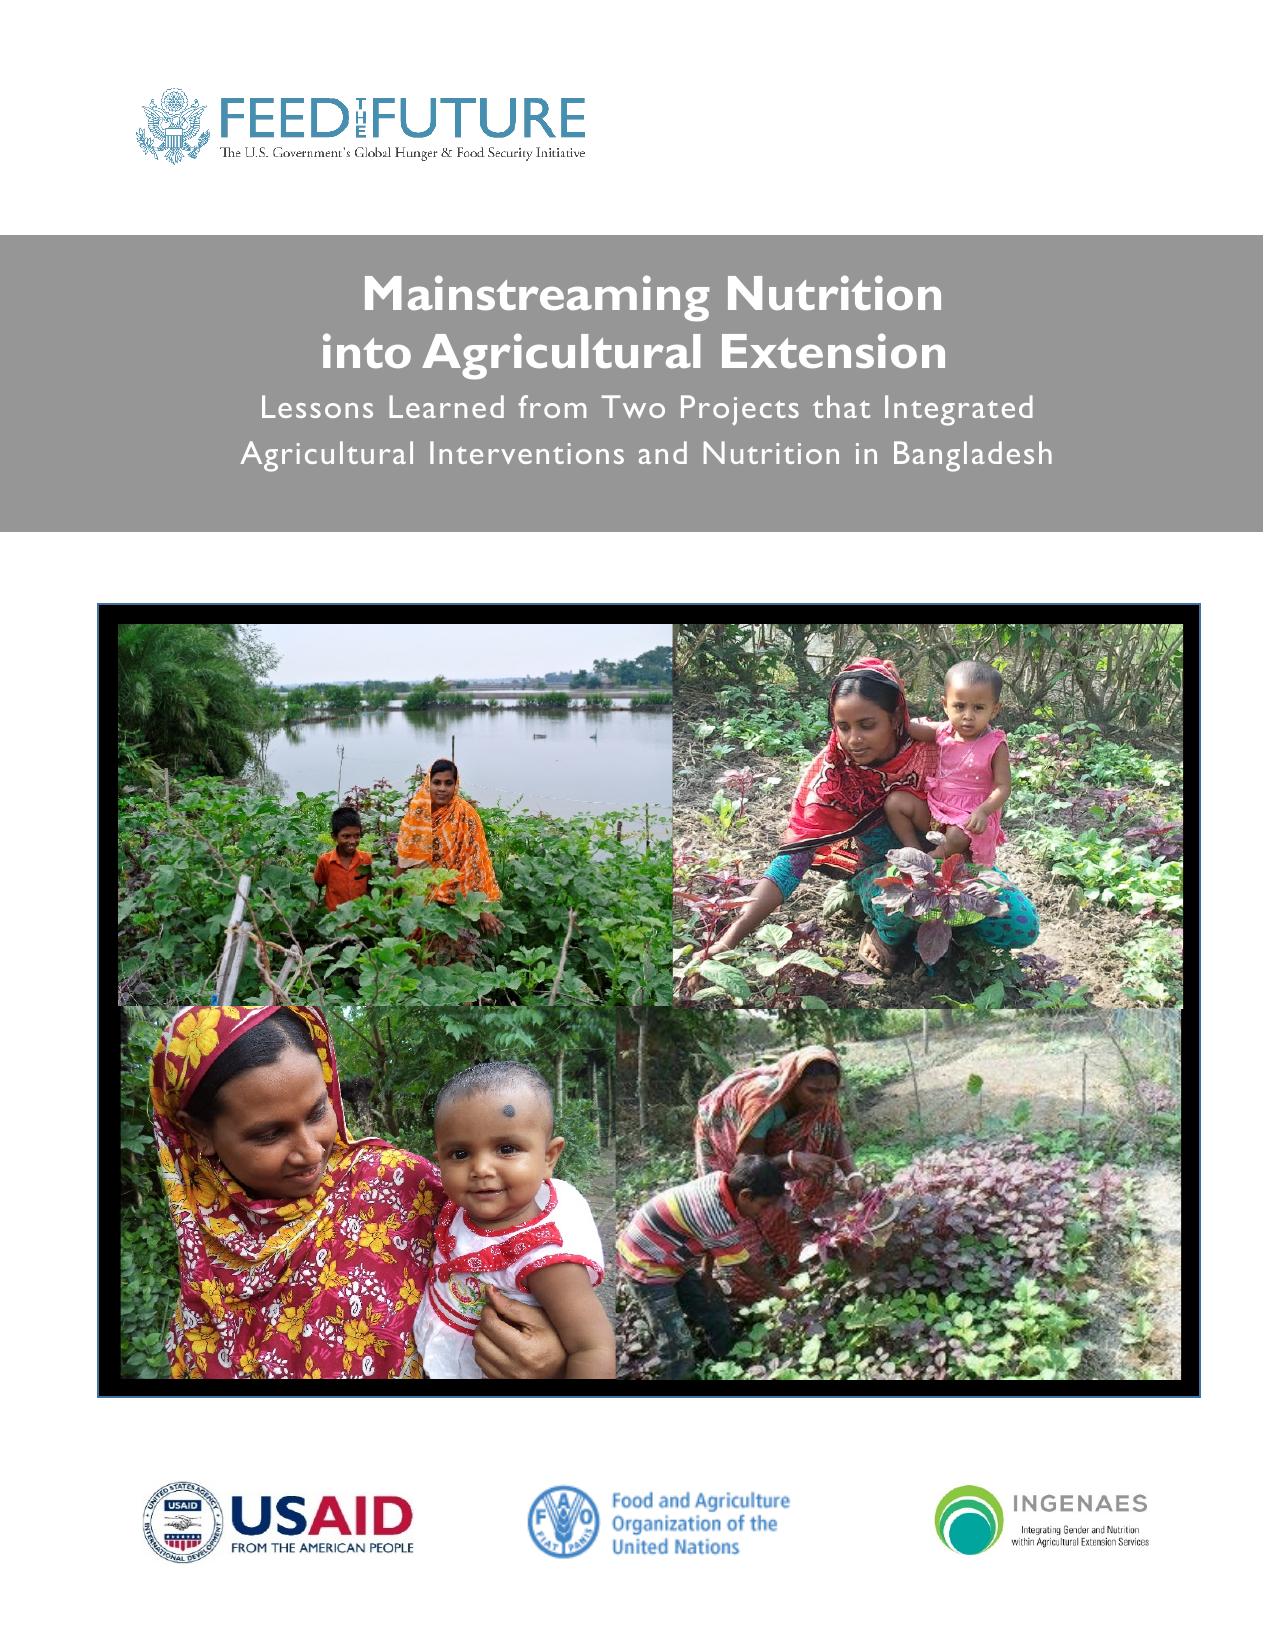 Mainstreaming Nutrition into Agricultural Extension 2016